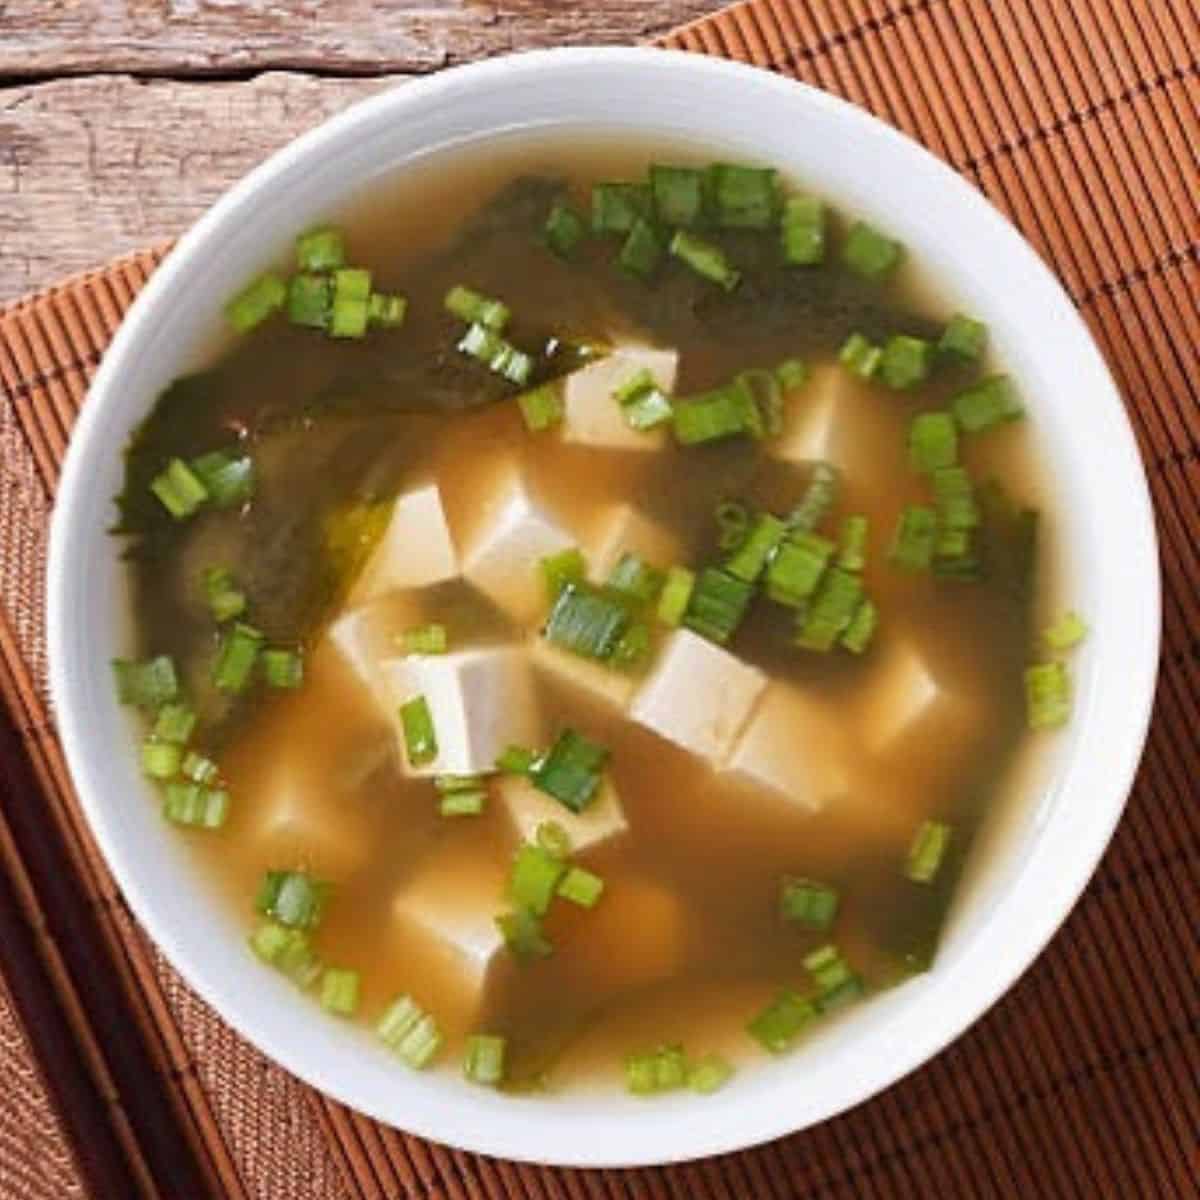 Miso soup most popular Japanese food